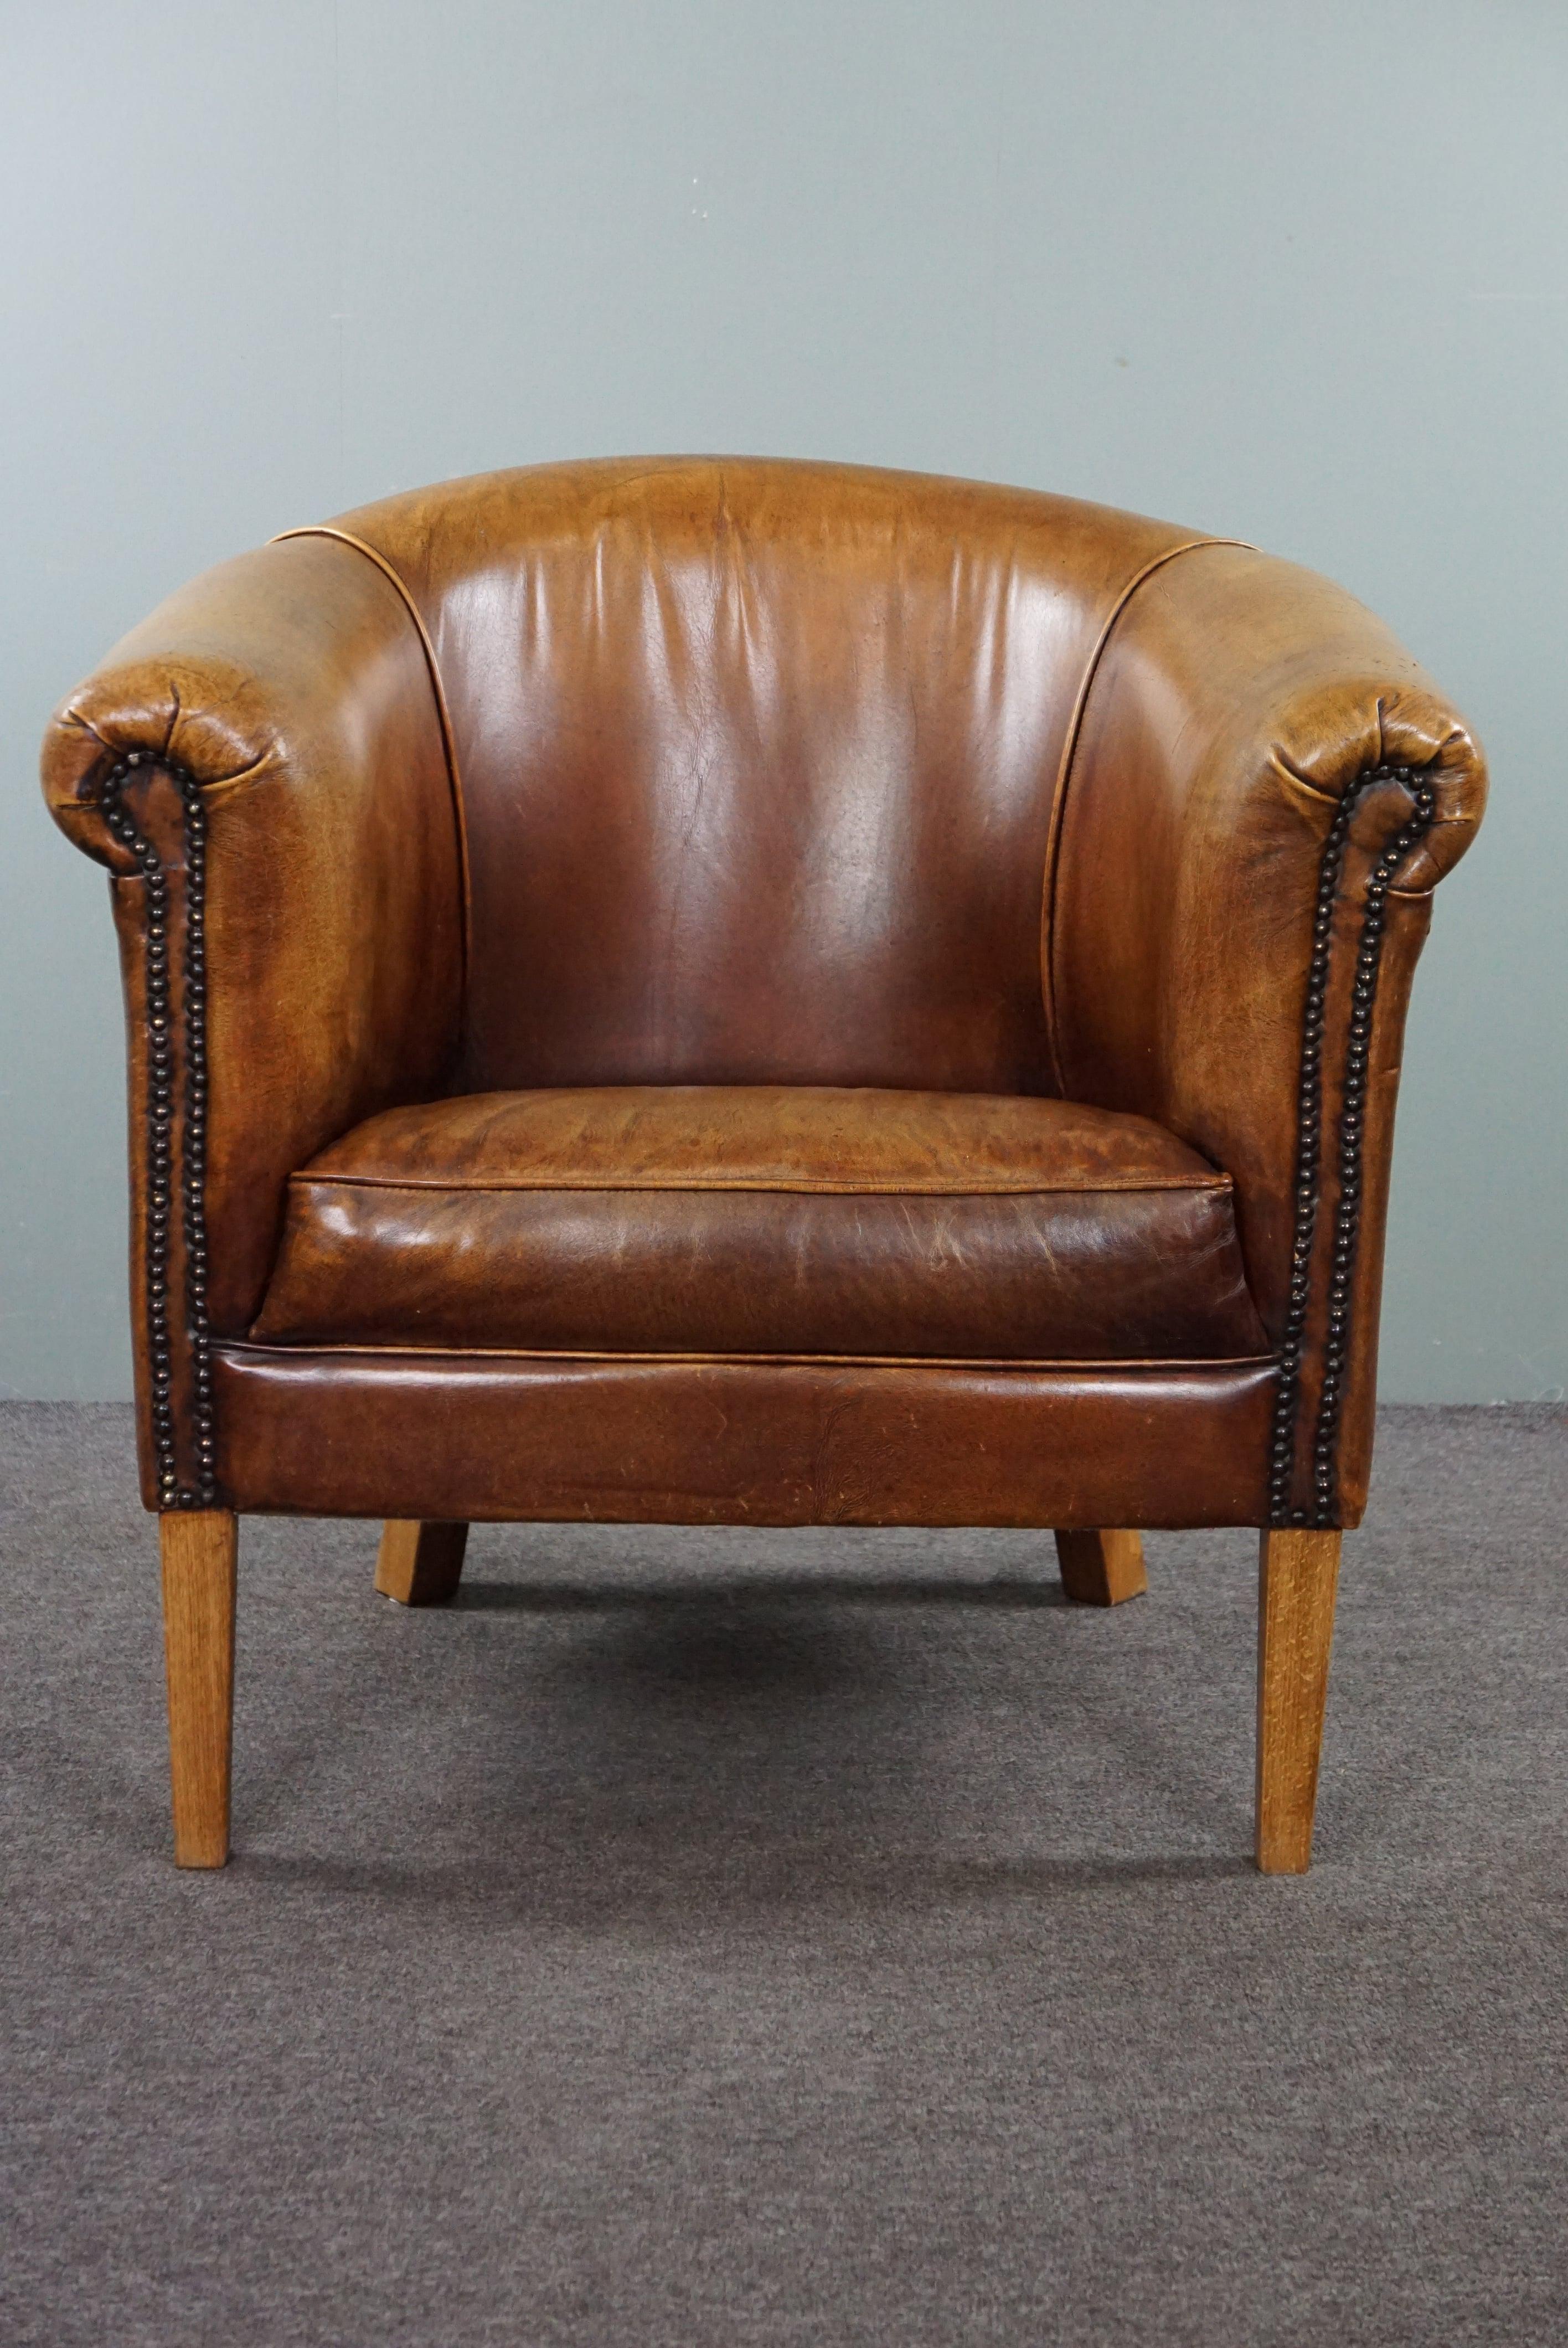 Offered this beautiful sheep leather club chair.

You see an armchair with a beautiful patina, a comfortable seat and a beautiful division in the back. This is an item that will provide you with years of enjoyment. This cowhide club chair provides